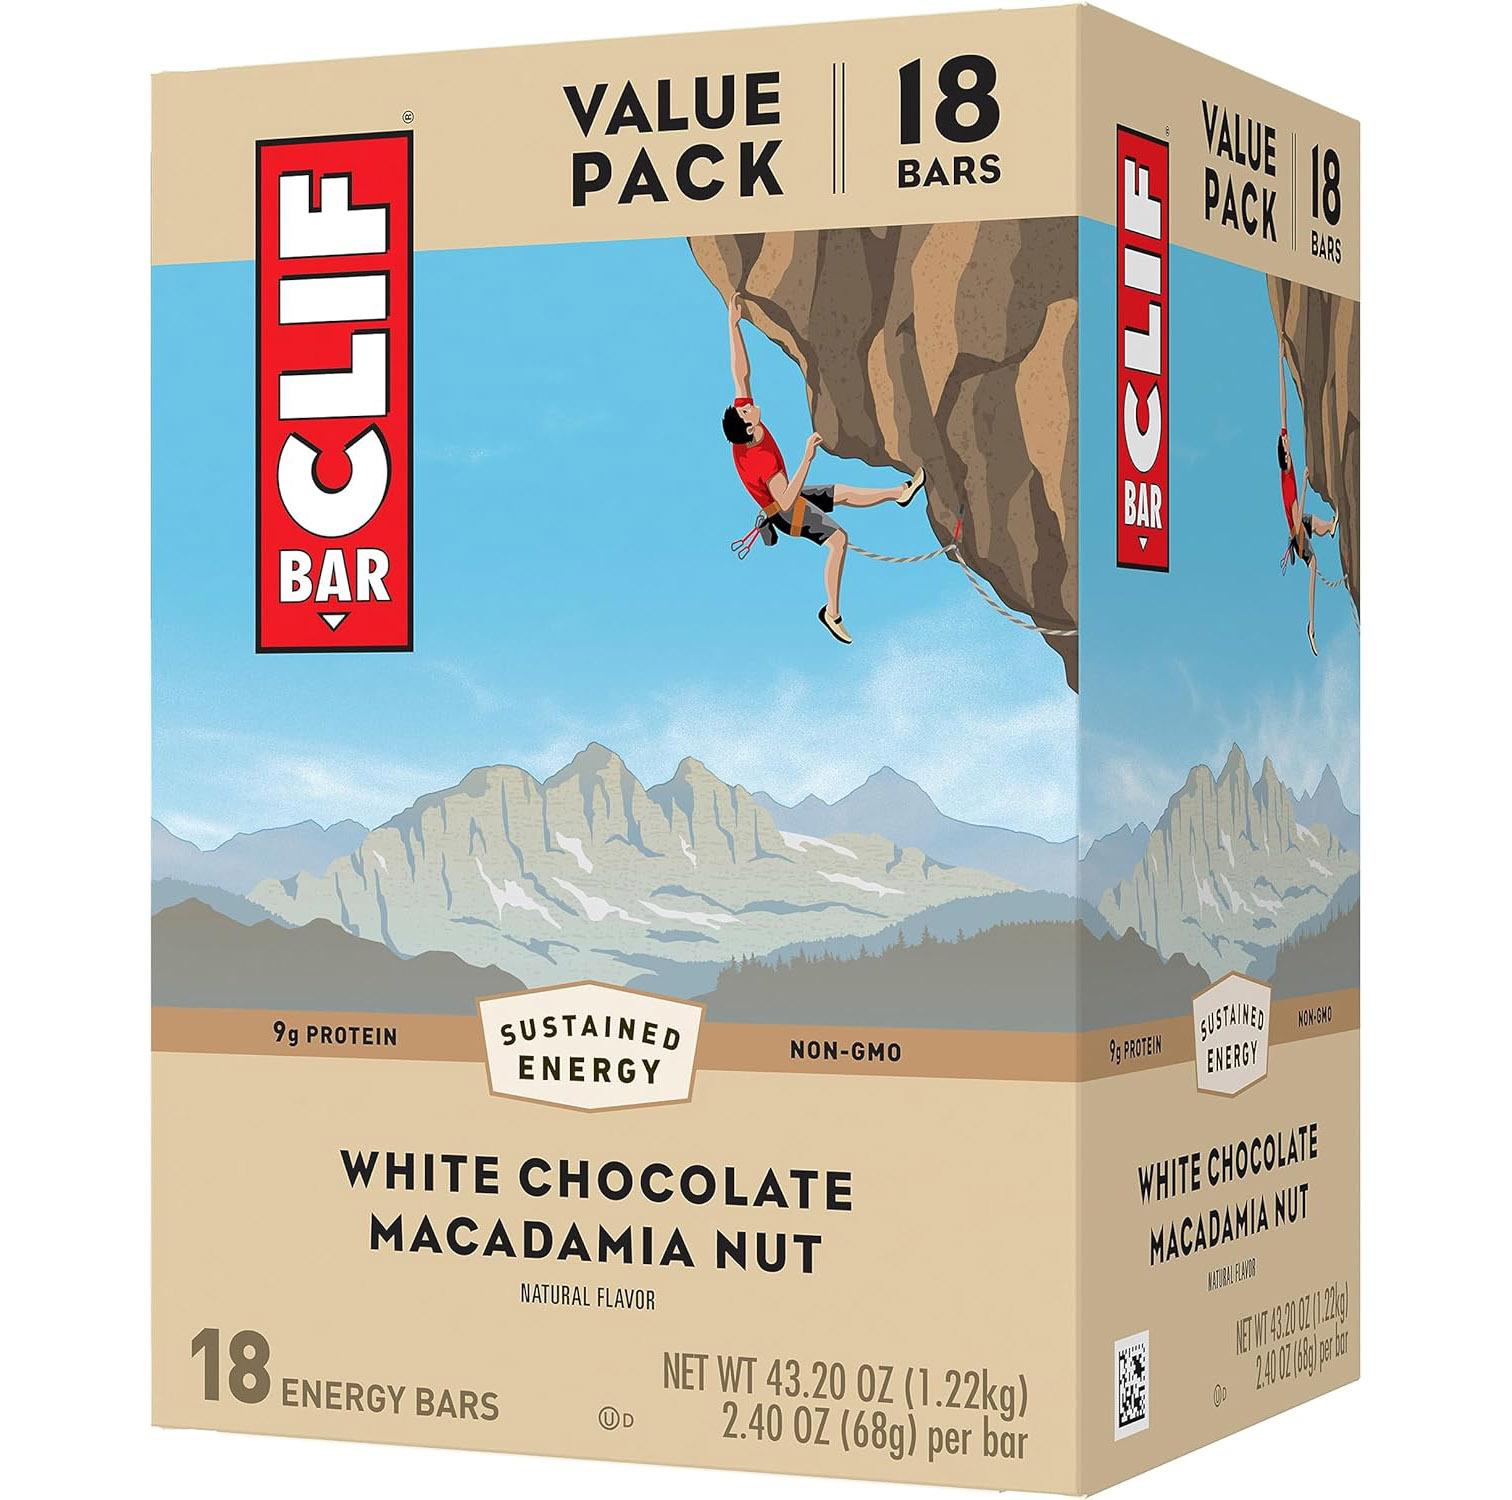 Clif Bar White Chocolate Macadamia Nut Flavor 18 Pack for $13.47